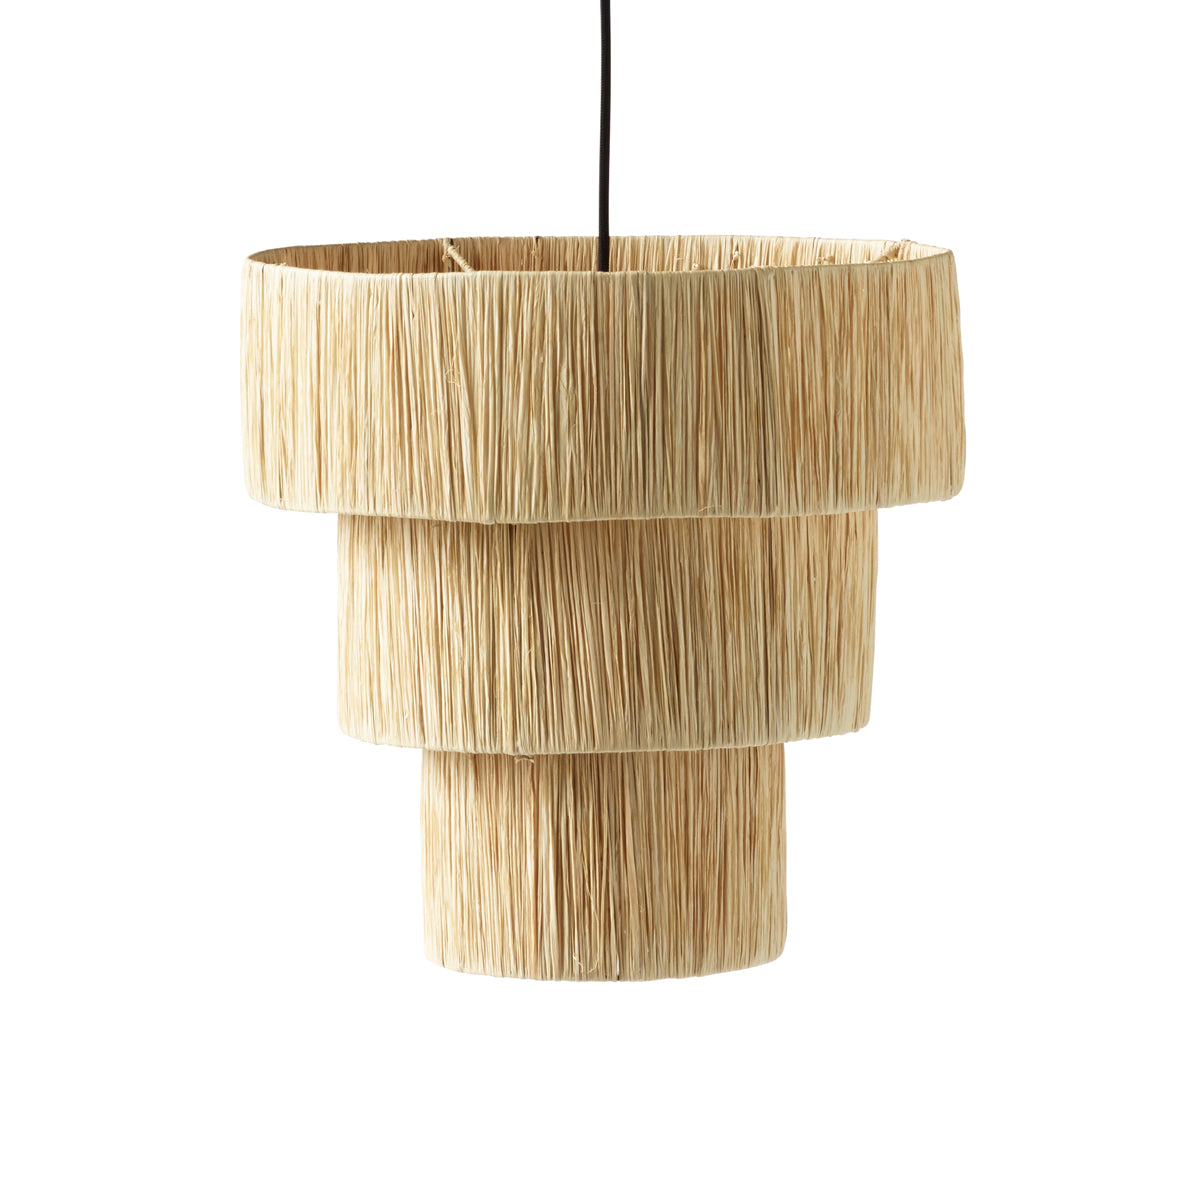 Woven Palm Leaves Large Pendant Shade 75cm